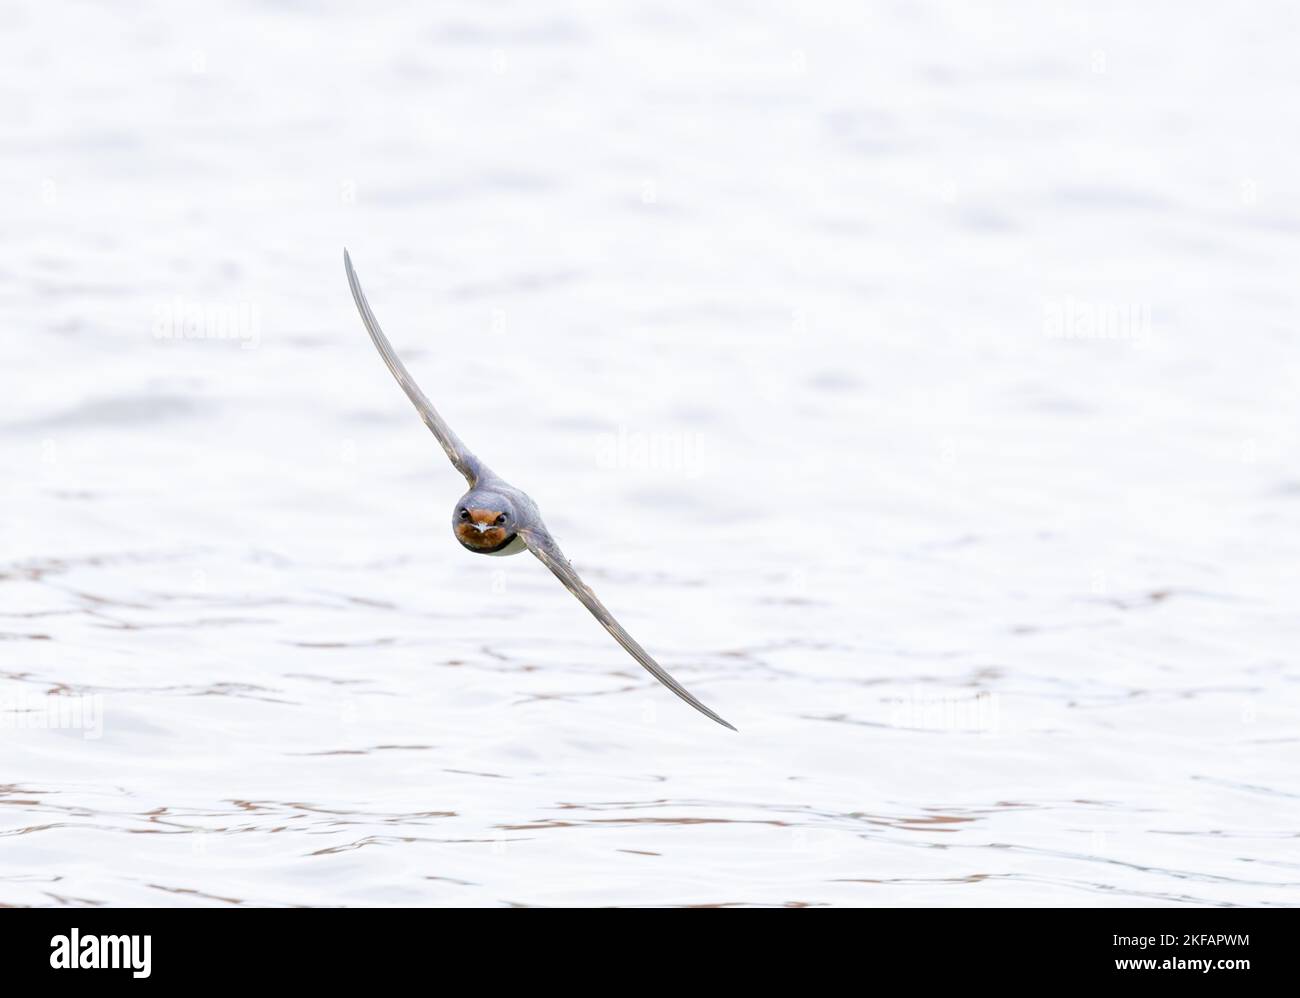 Barn swallow over water Stock Photo